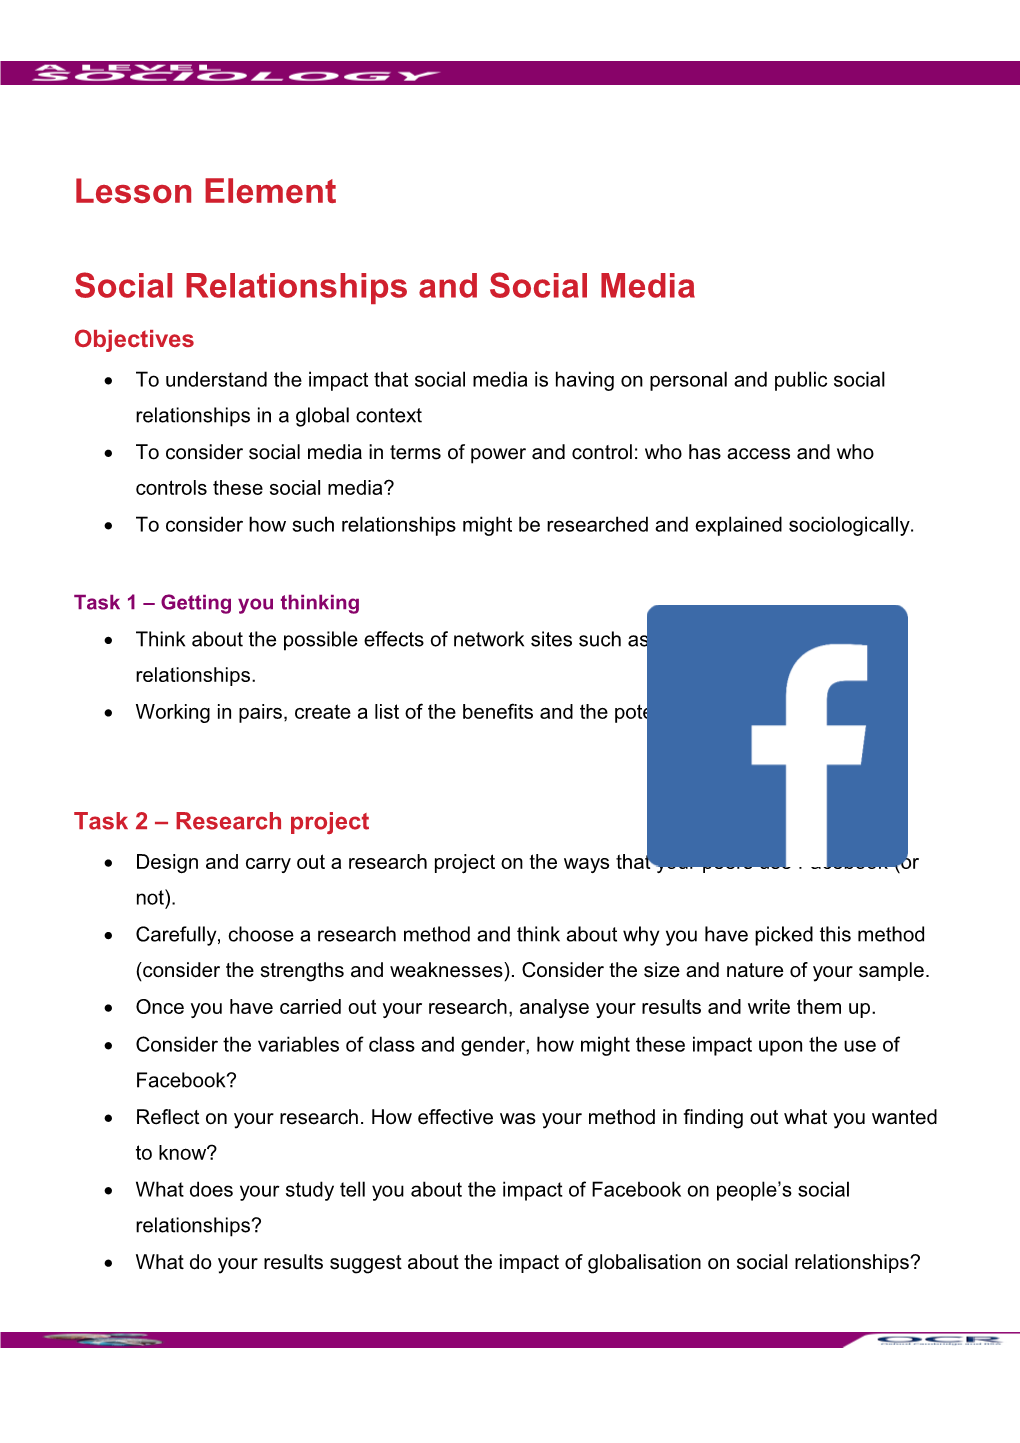 A Level Sociology Lesson Element Learner Activity (Social Relationships and Social Media)